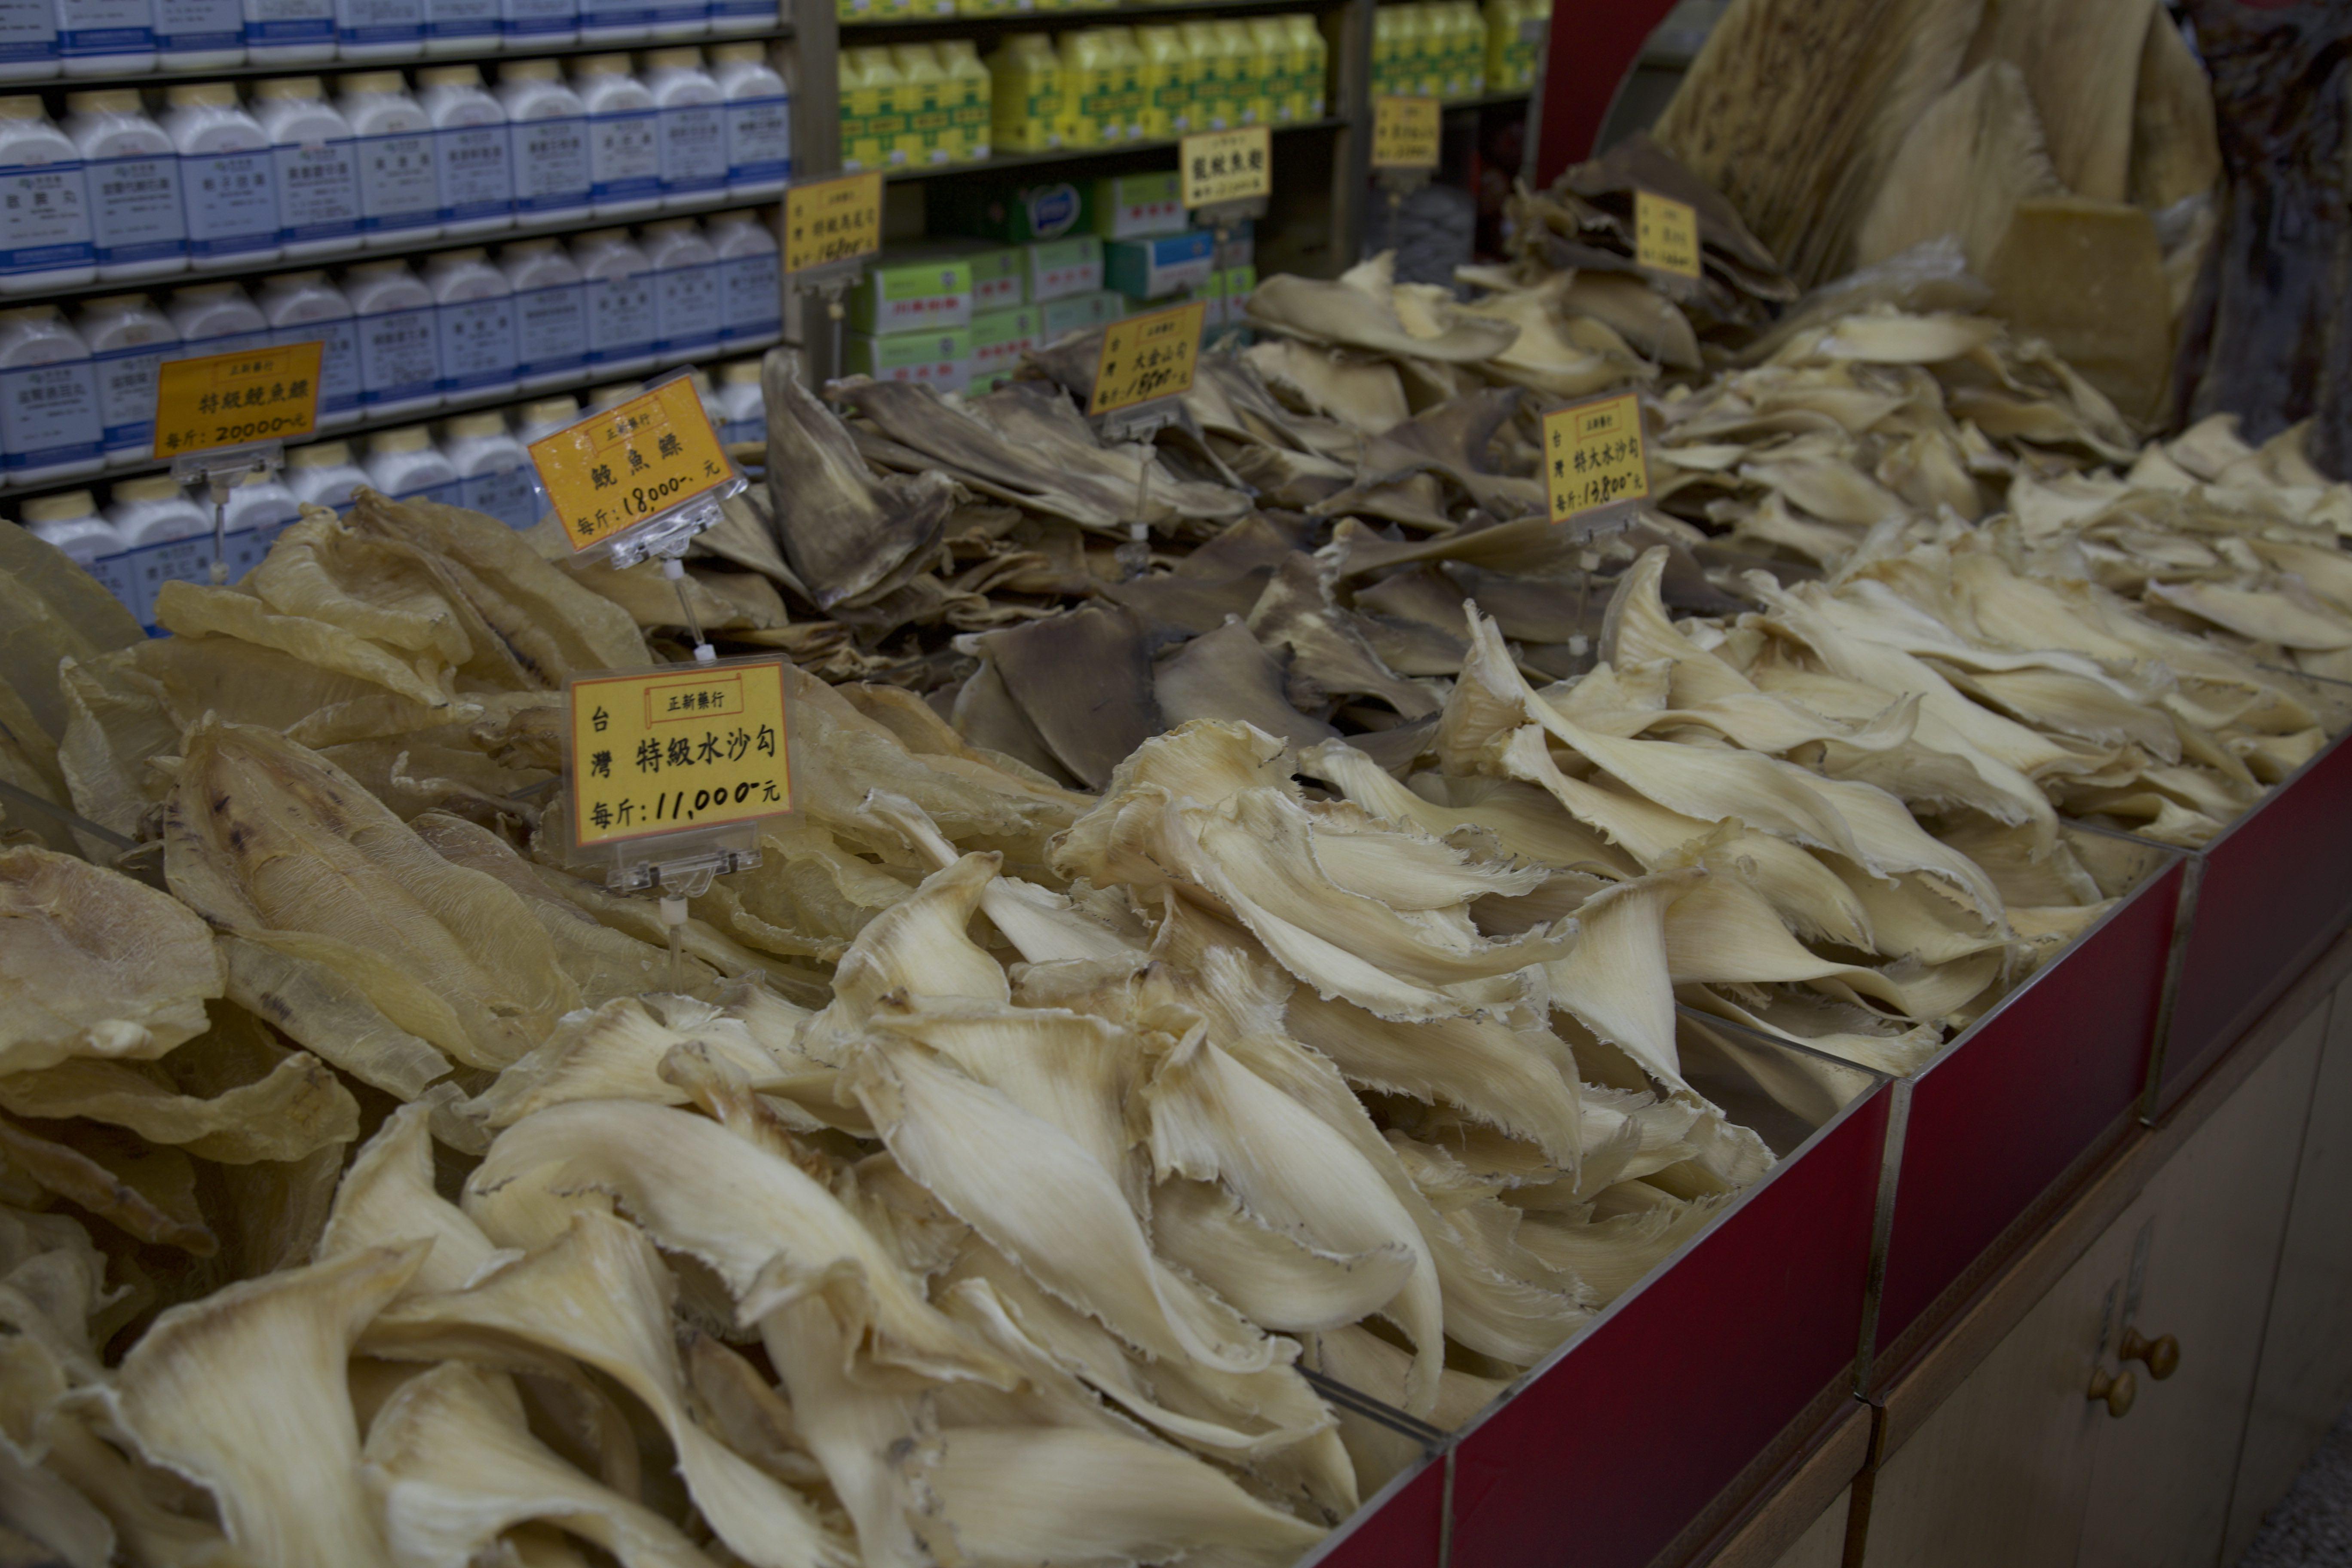 Taiwan clamps down on shark finning